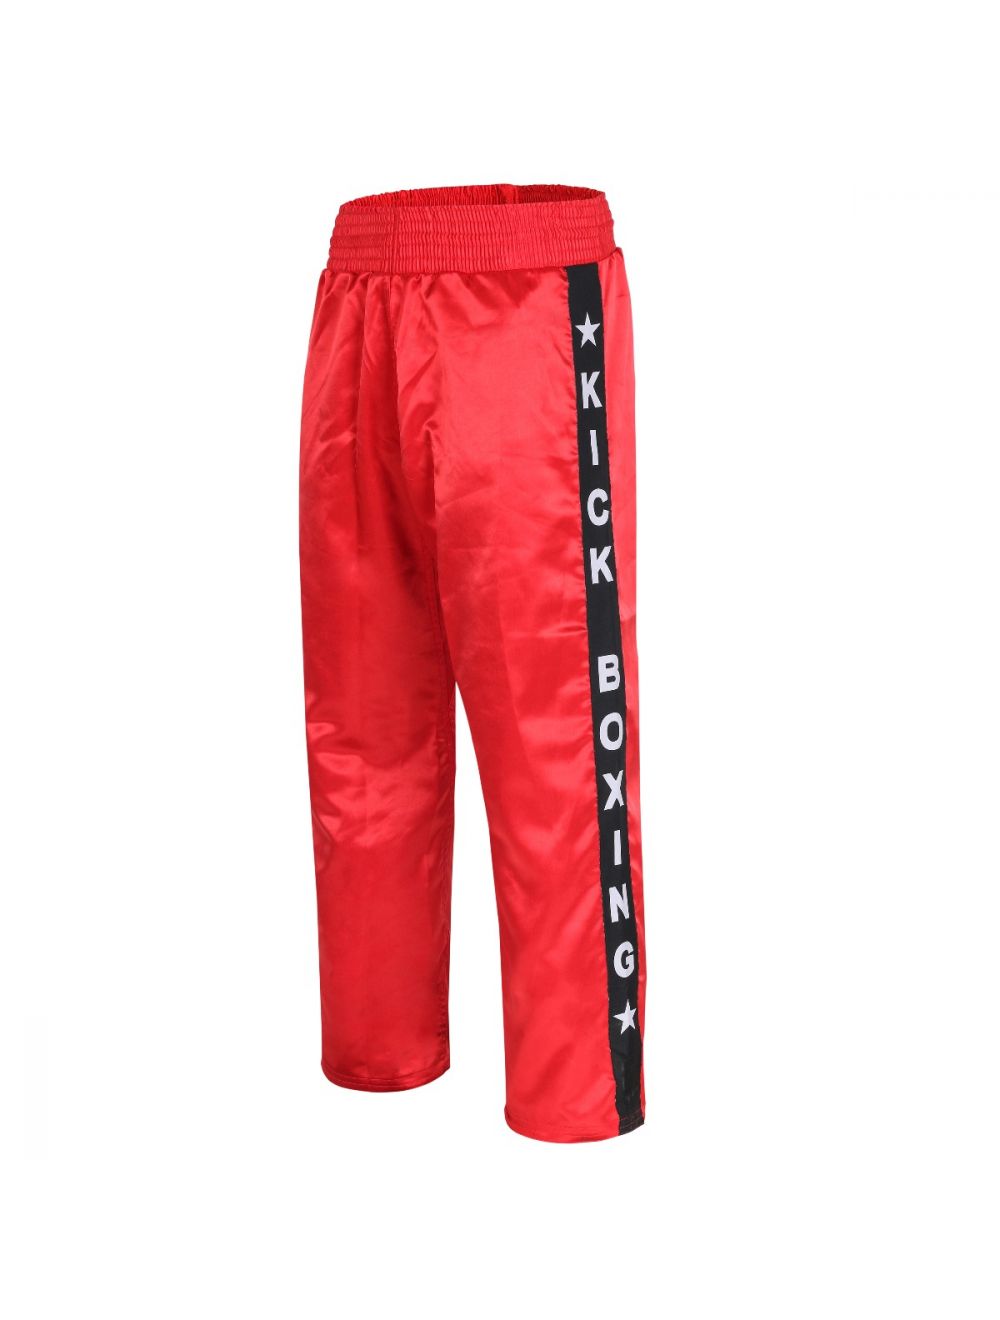 Black Kickboxing Trousers Cotton with Red Stripes - Enso Martial Arts Shop  Bristol